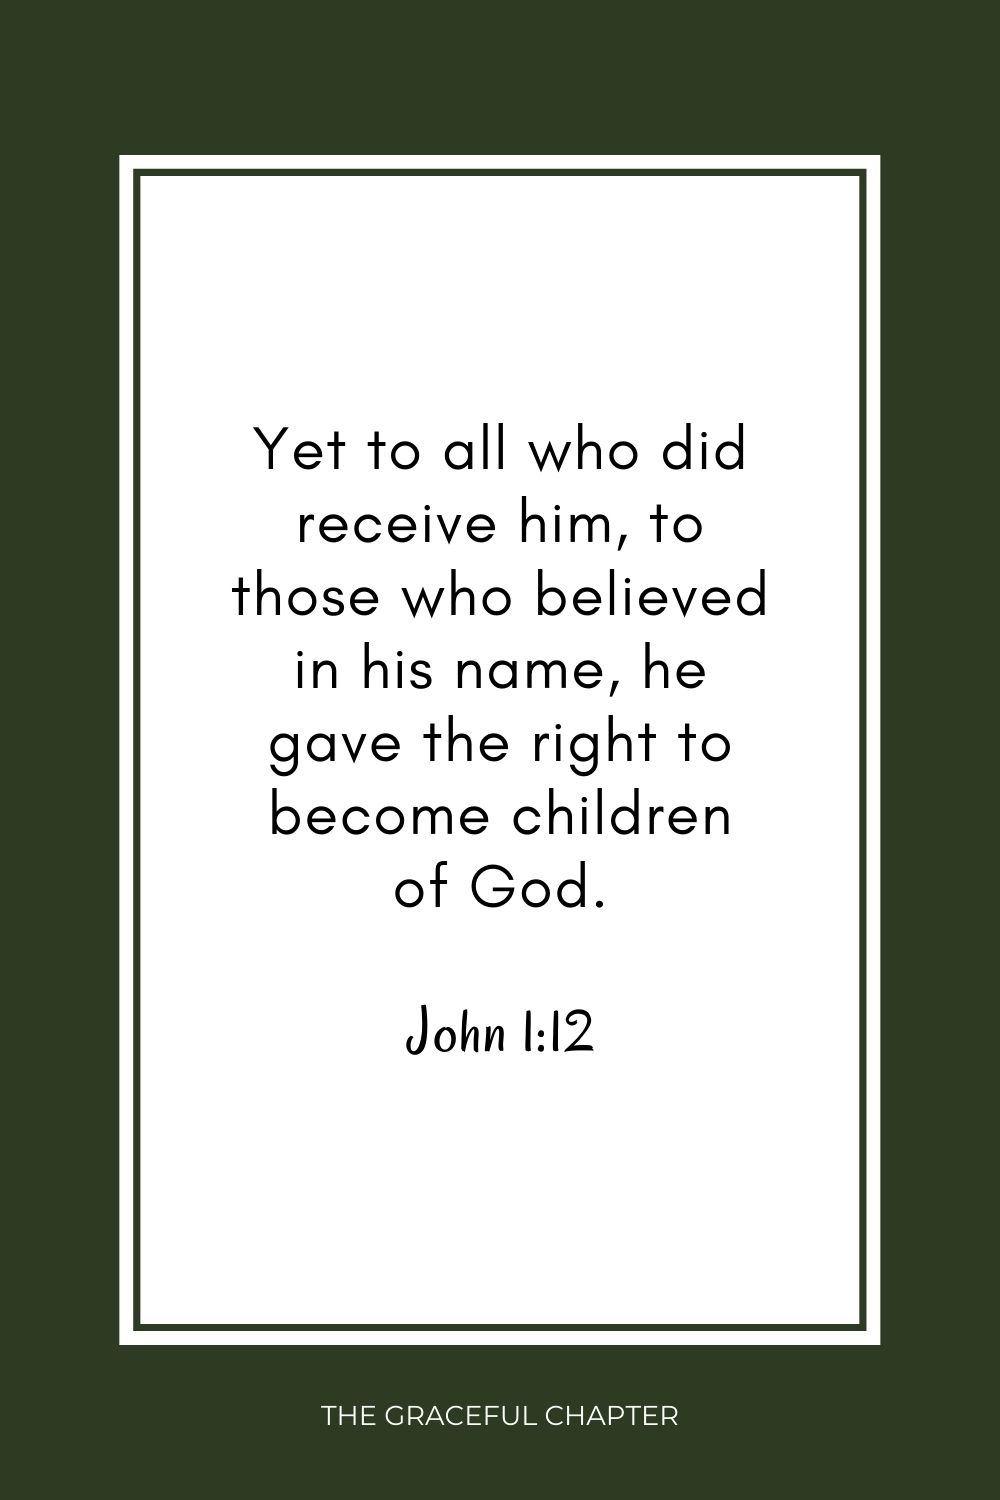 Yet to all who did receive him, to those who believed in his name, he gave the right to become children of God. John 1:12 being born again 